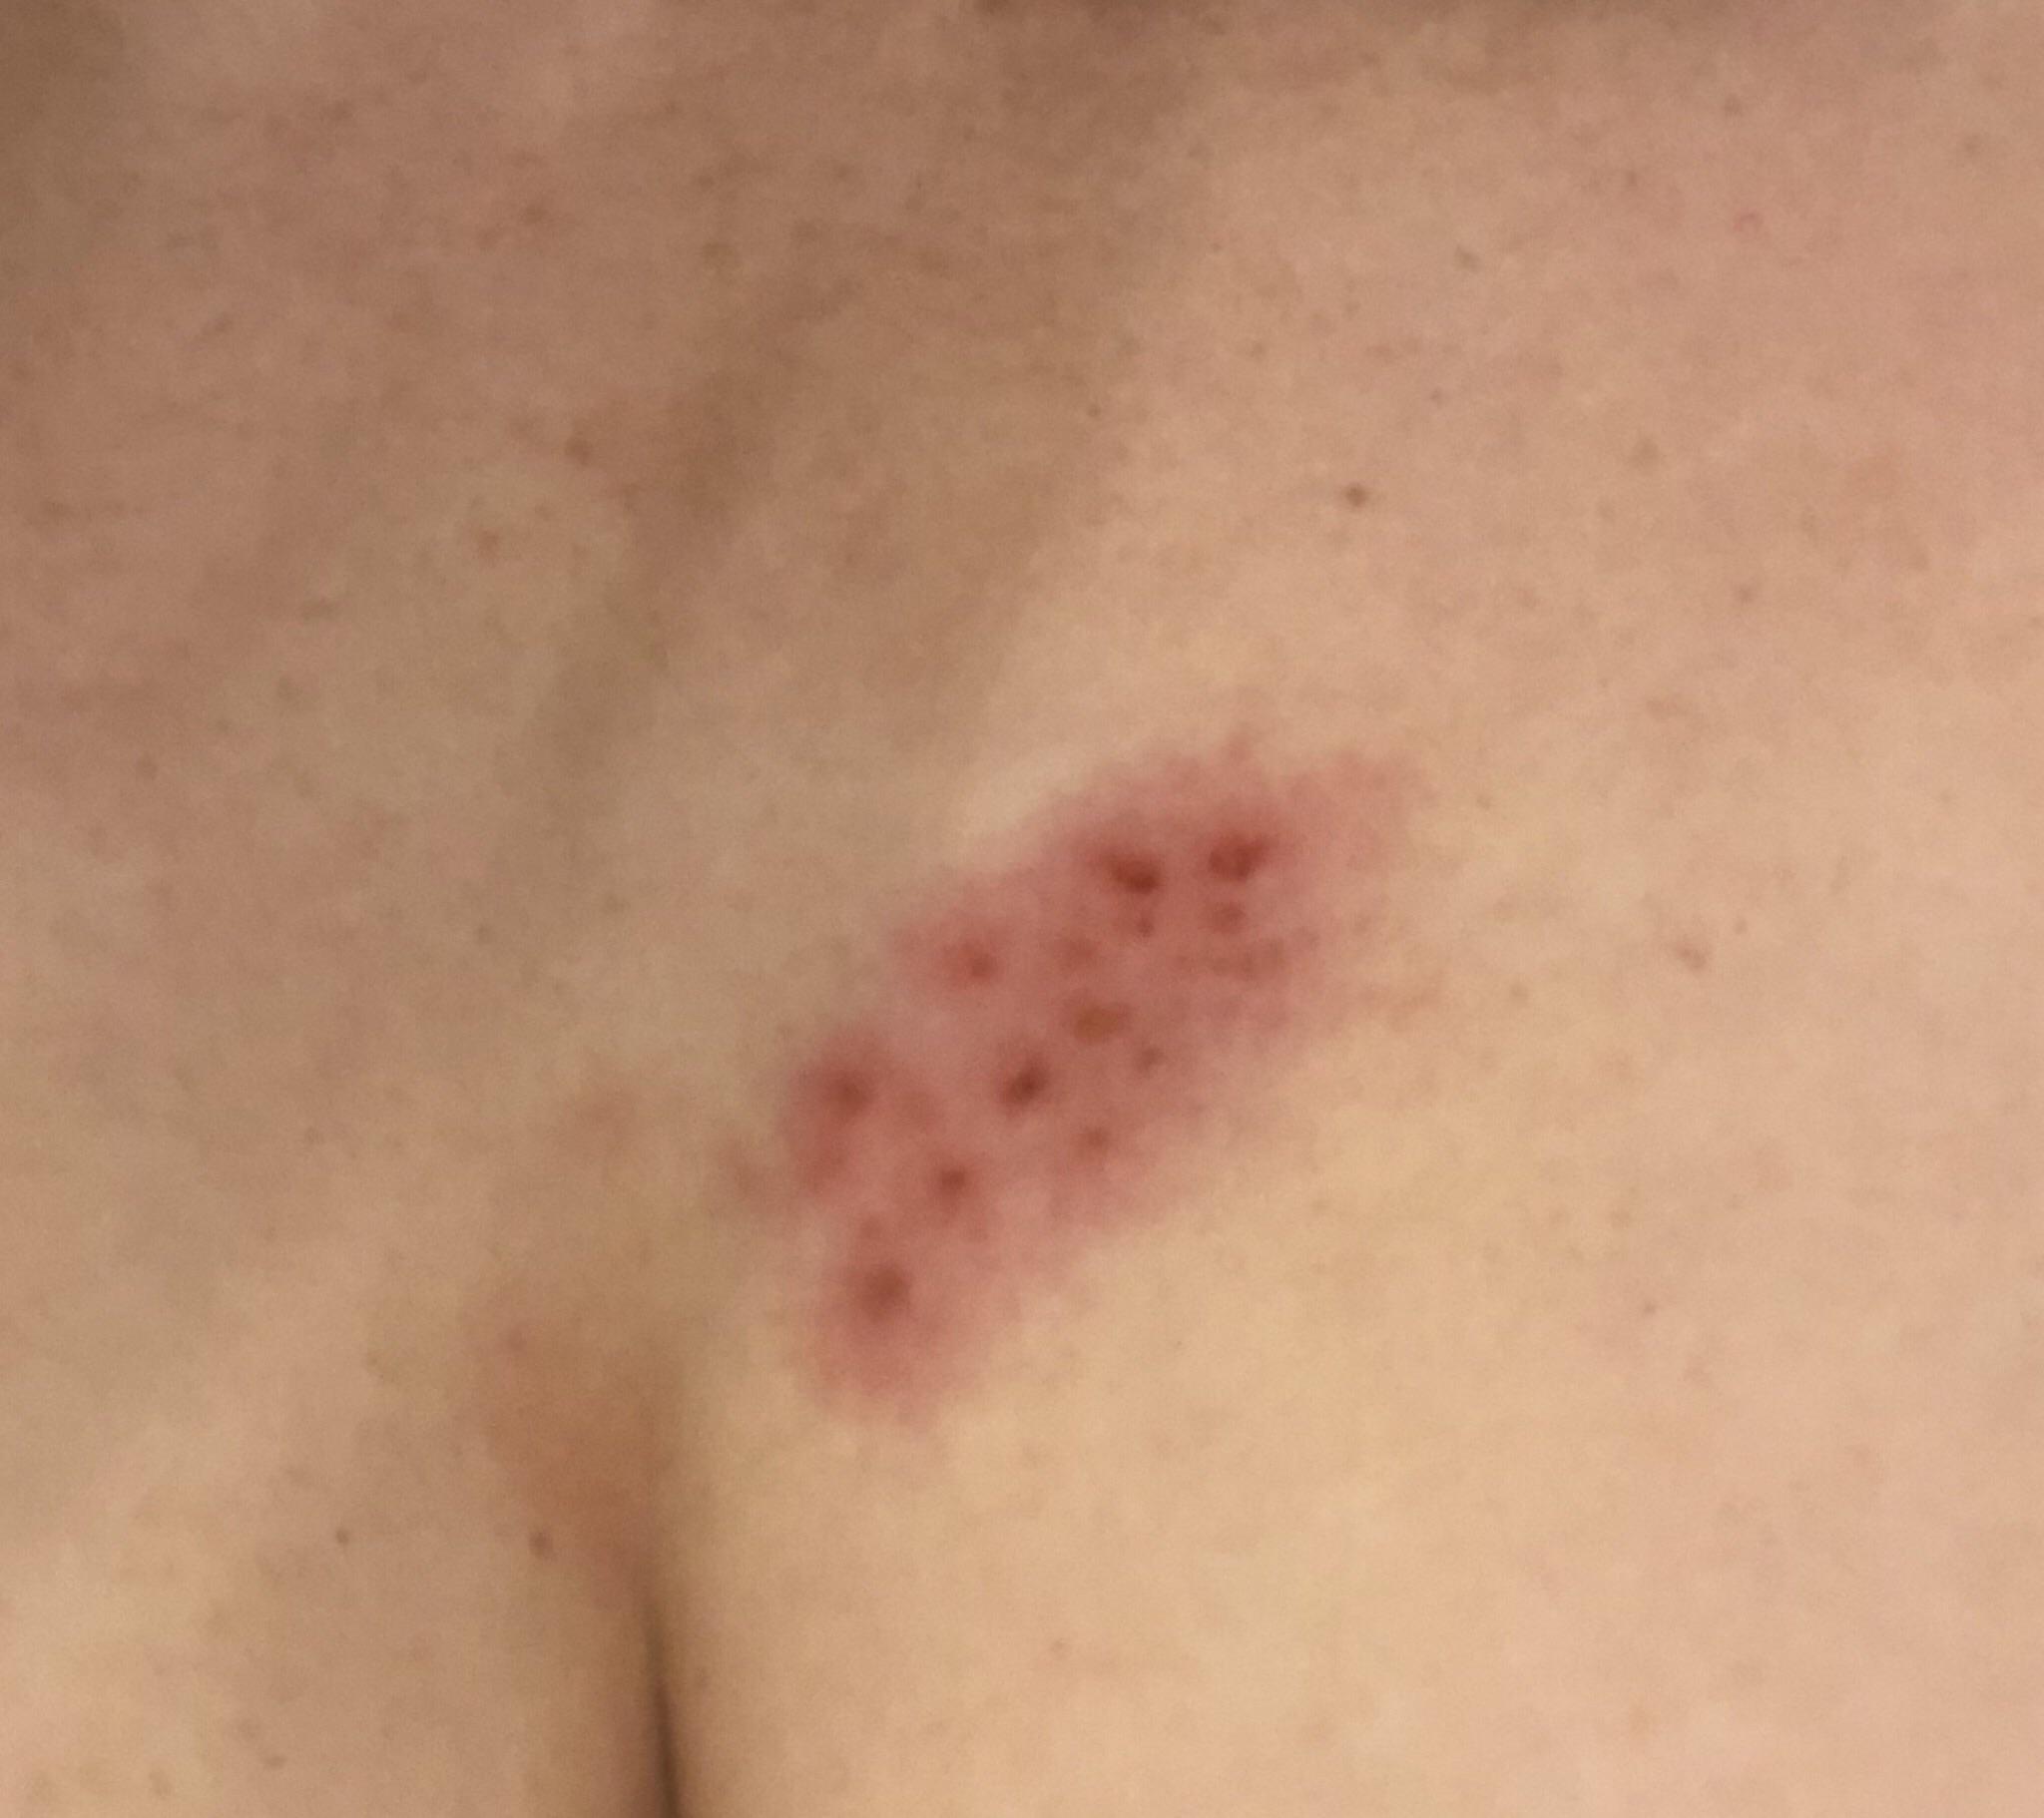 Shingles Update! Since you guys diagnosed correctly I thought I would ...